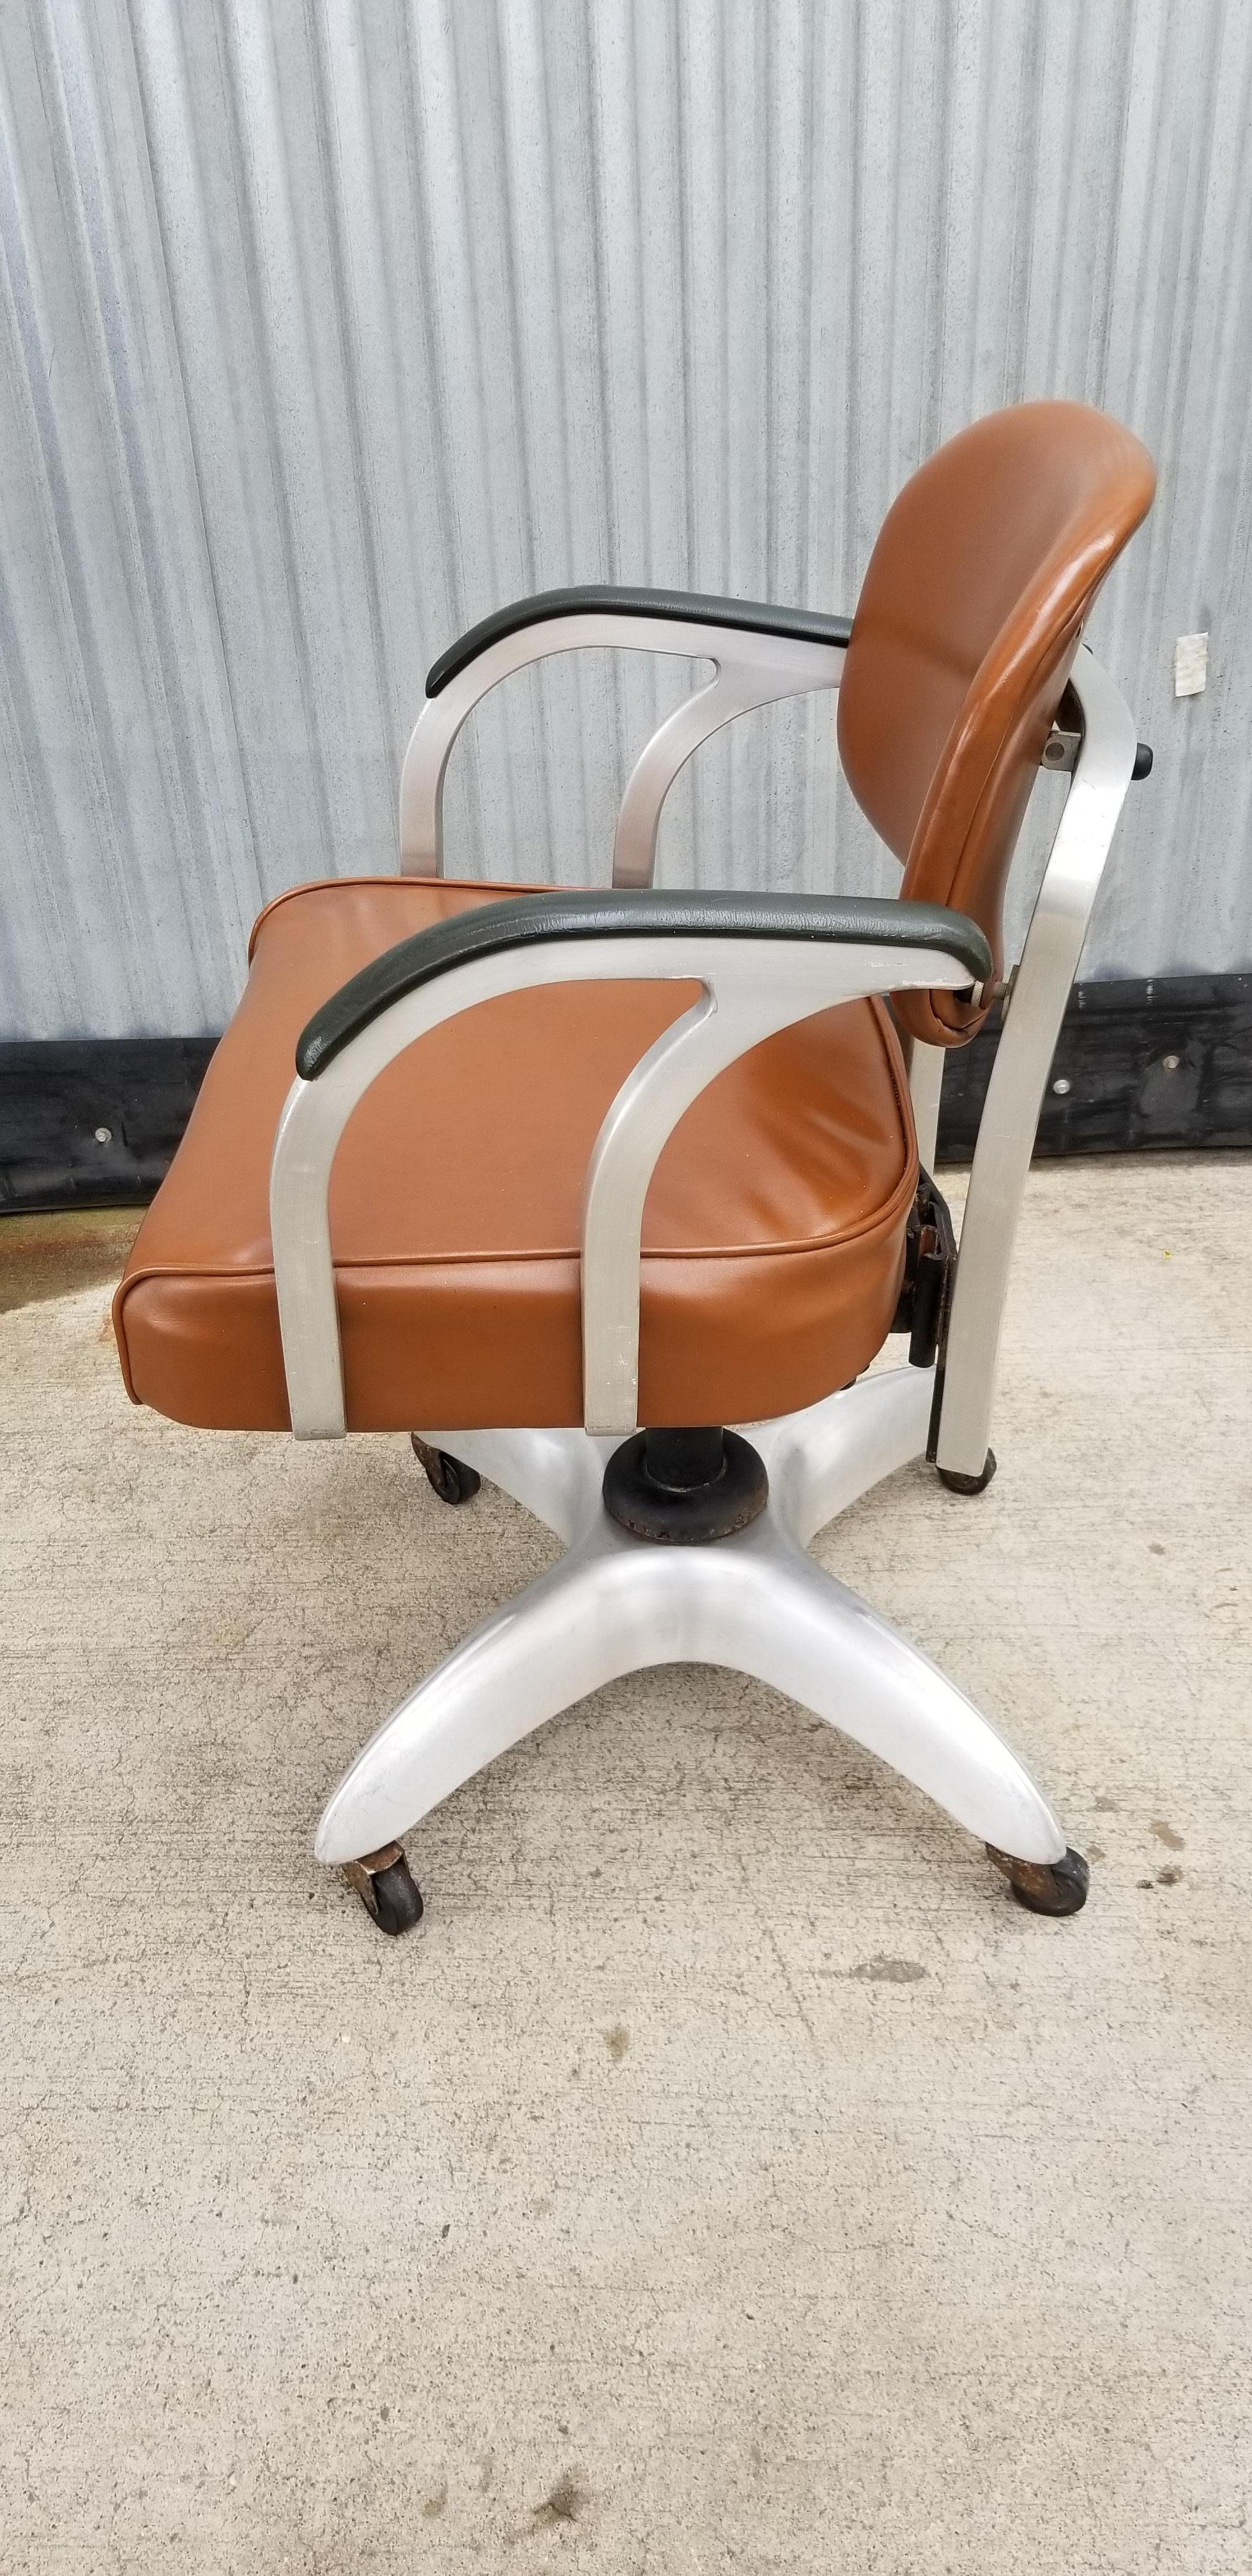 Fantastic aluminum industrial modern swivel desk chair by GoodForm. Steel and aluminum construction with original vinyl upholstery. Very good original vintage condition. Seat height is adjustable.